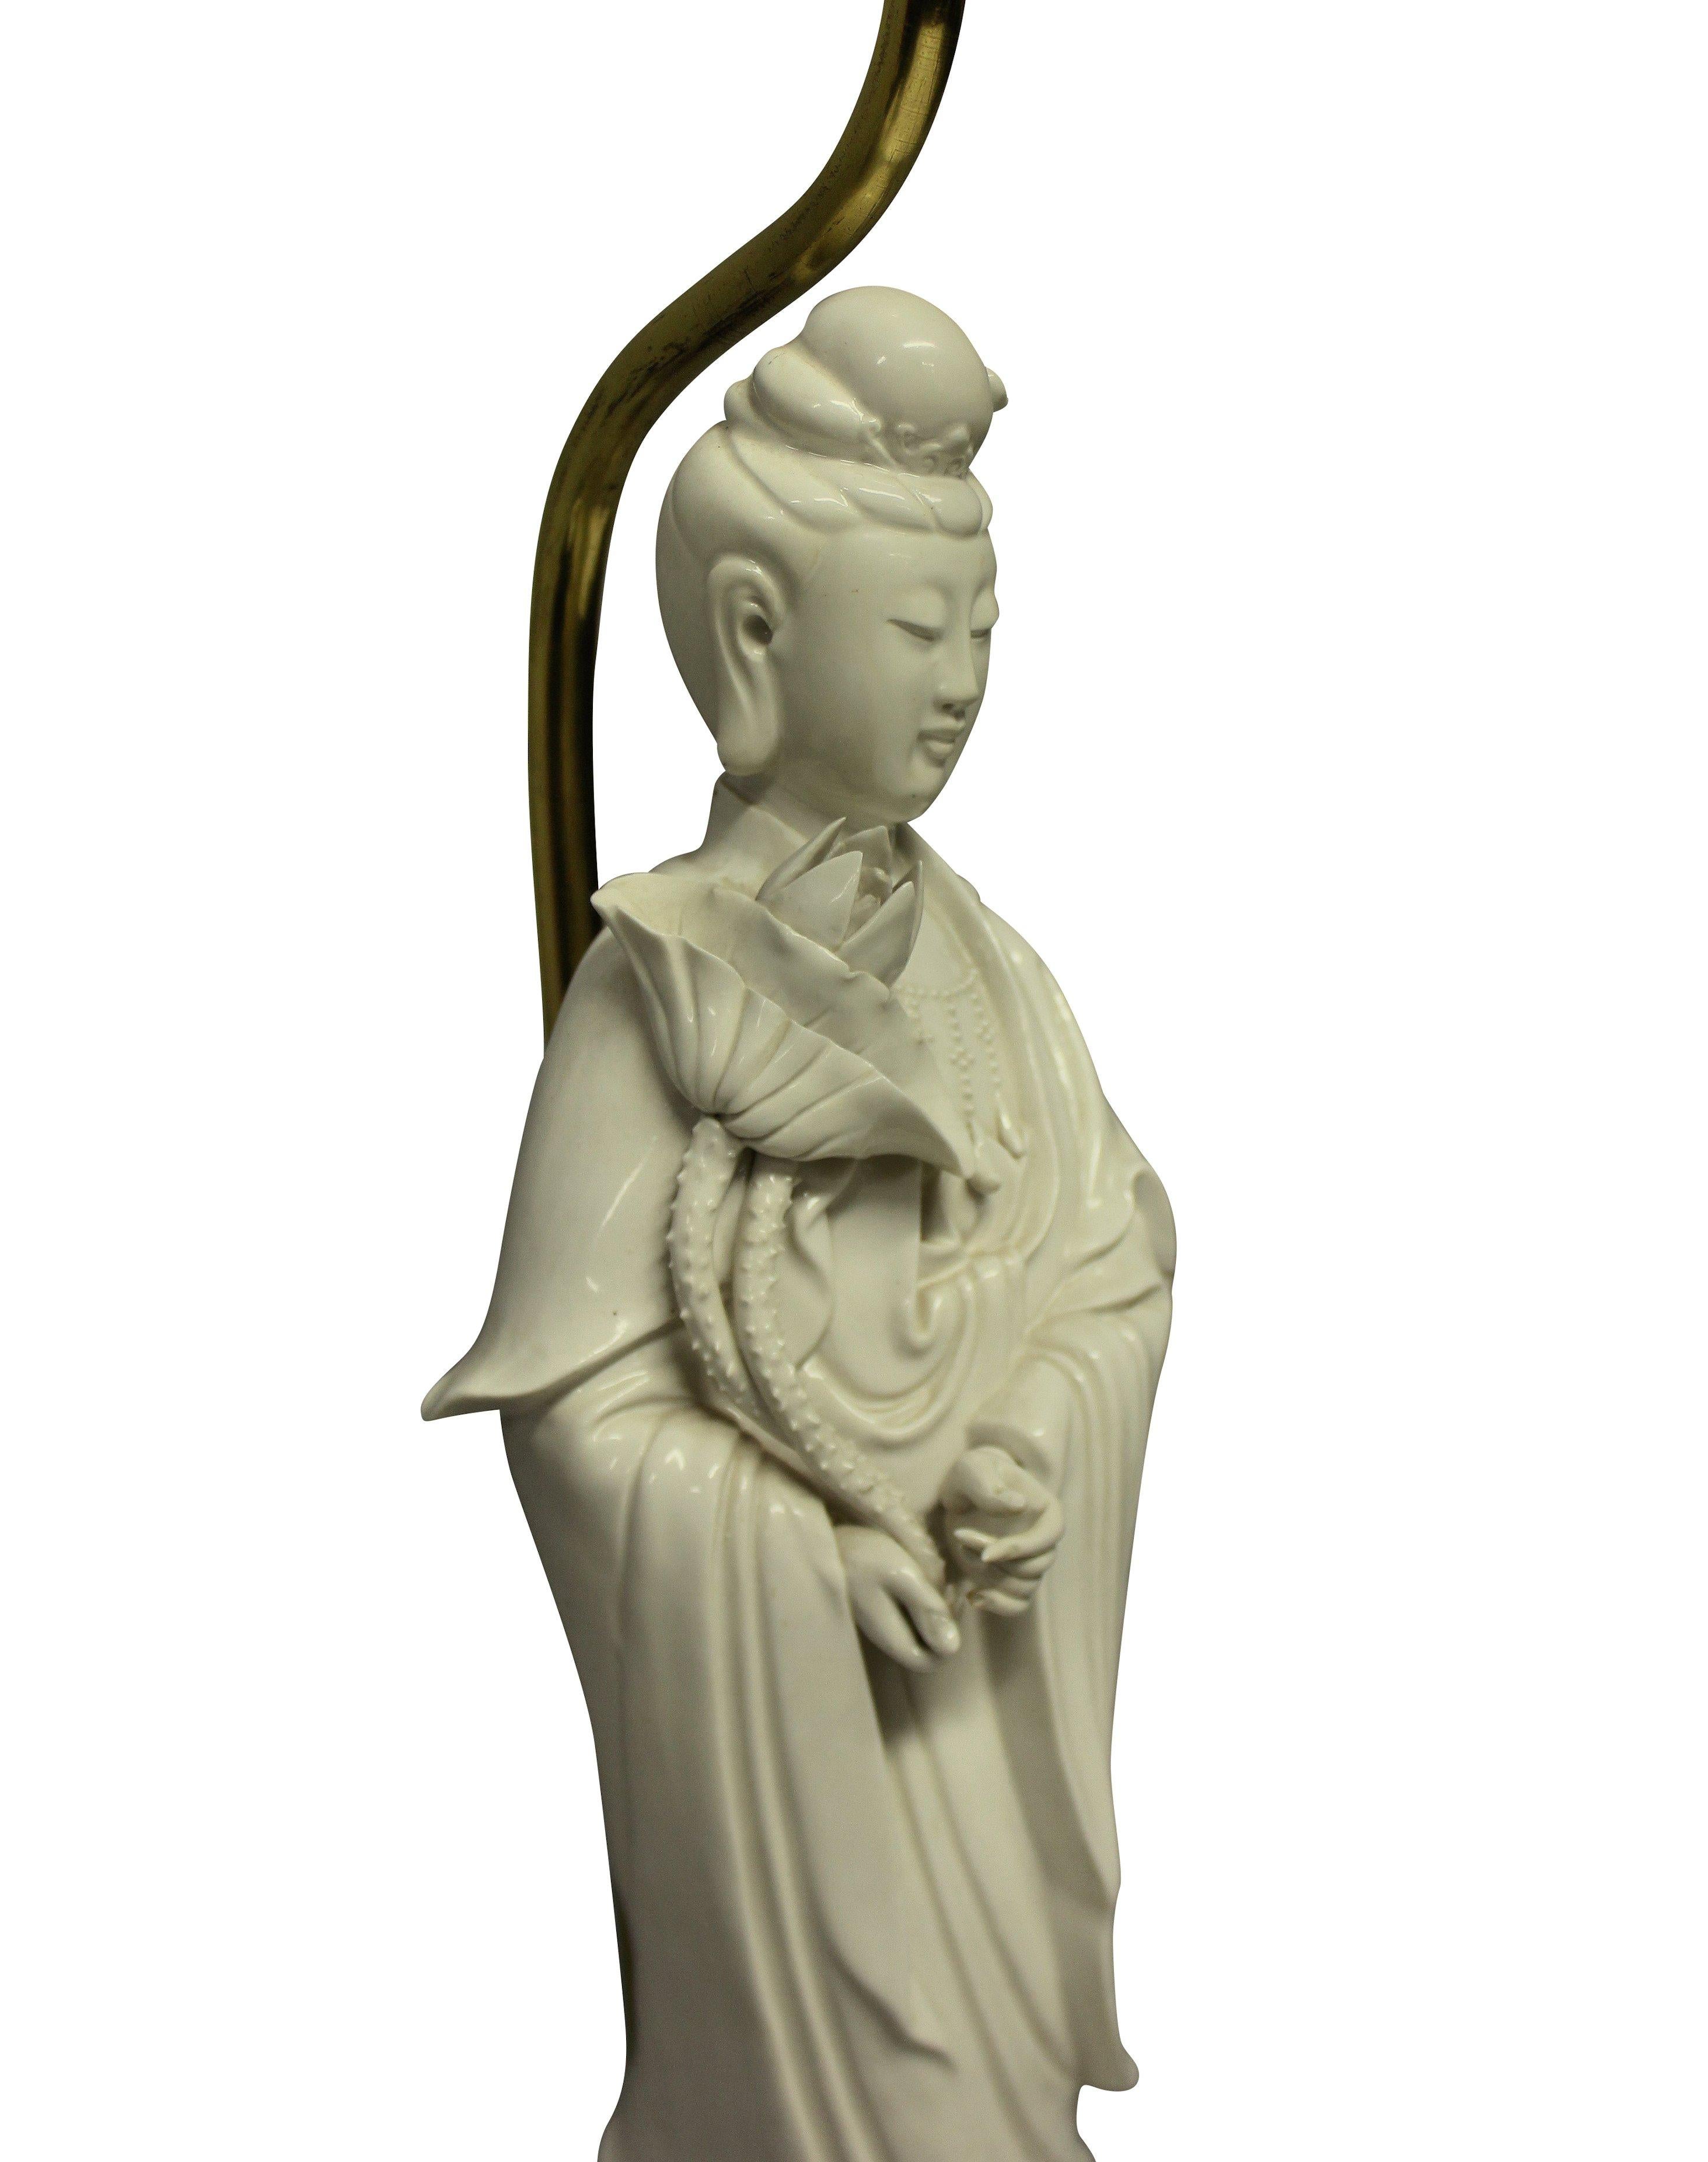 A fine French blanc de chine porcelain table lamp in the oriental manner. Depicting a Chinese lady standing upon a water gilded base.